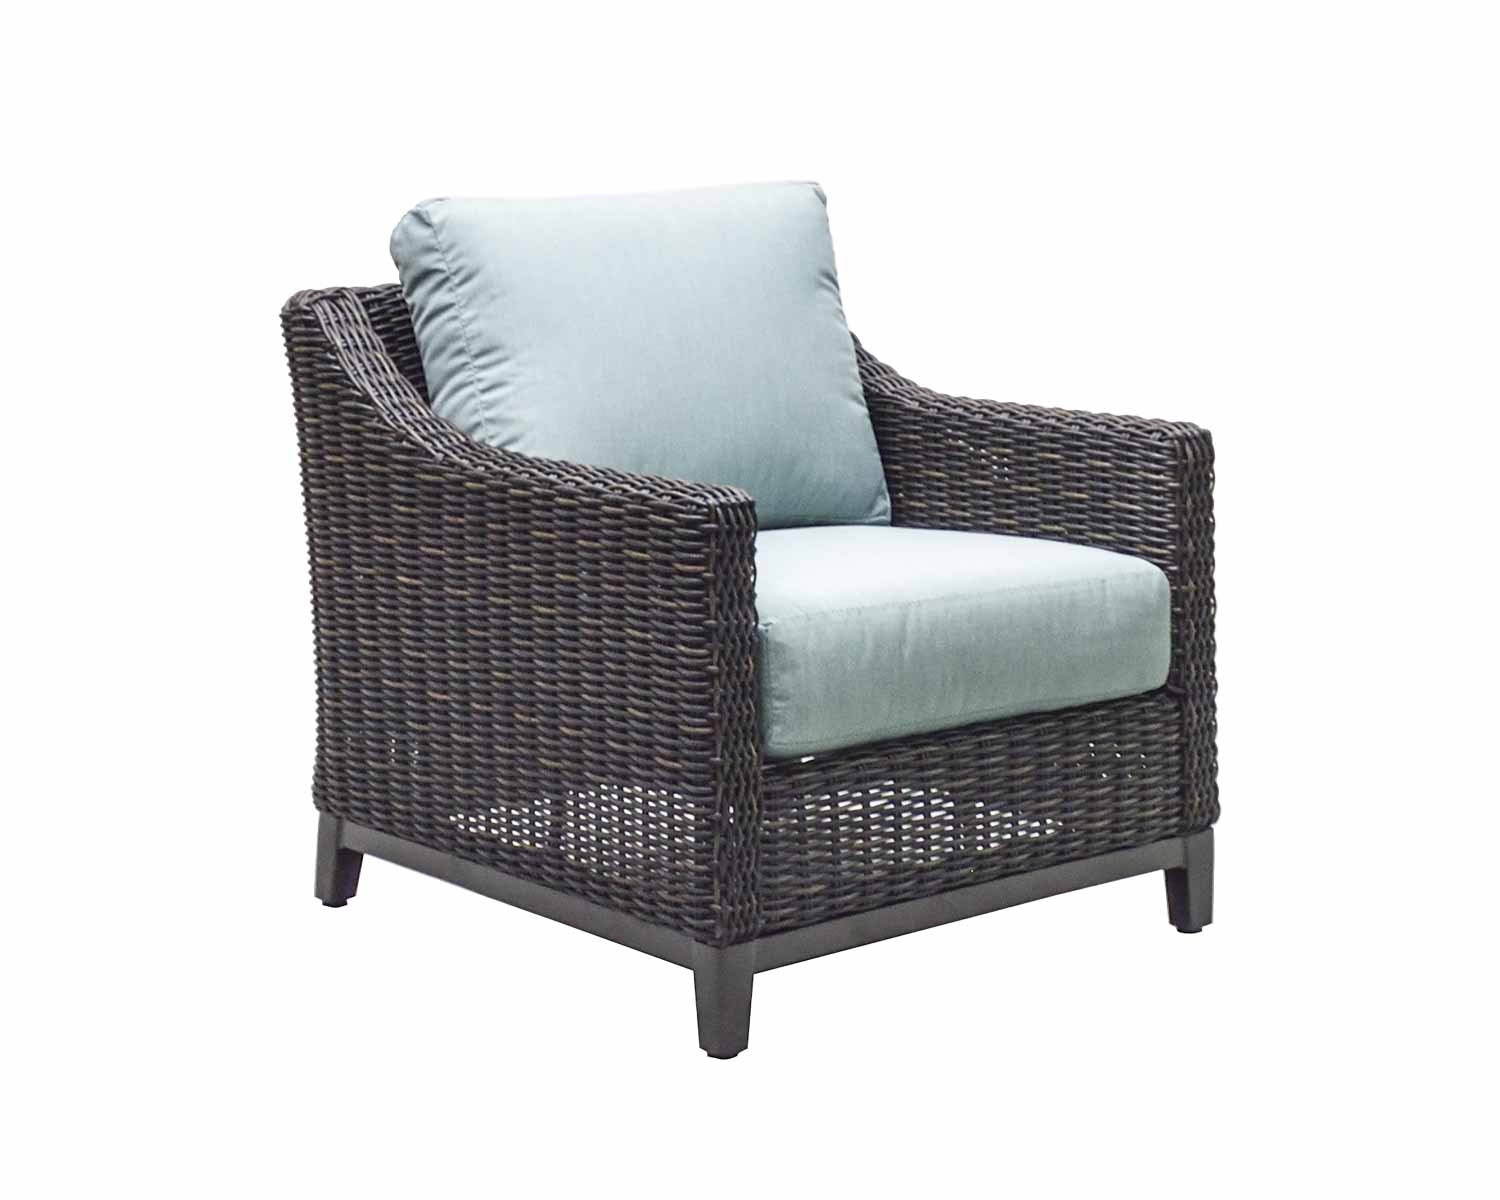 Somerset Lounge Chair By Patio Renaissance